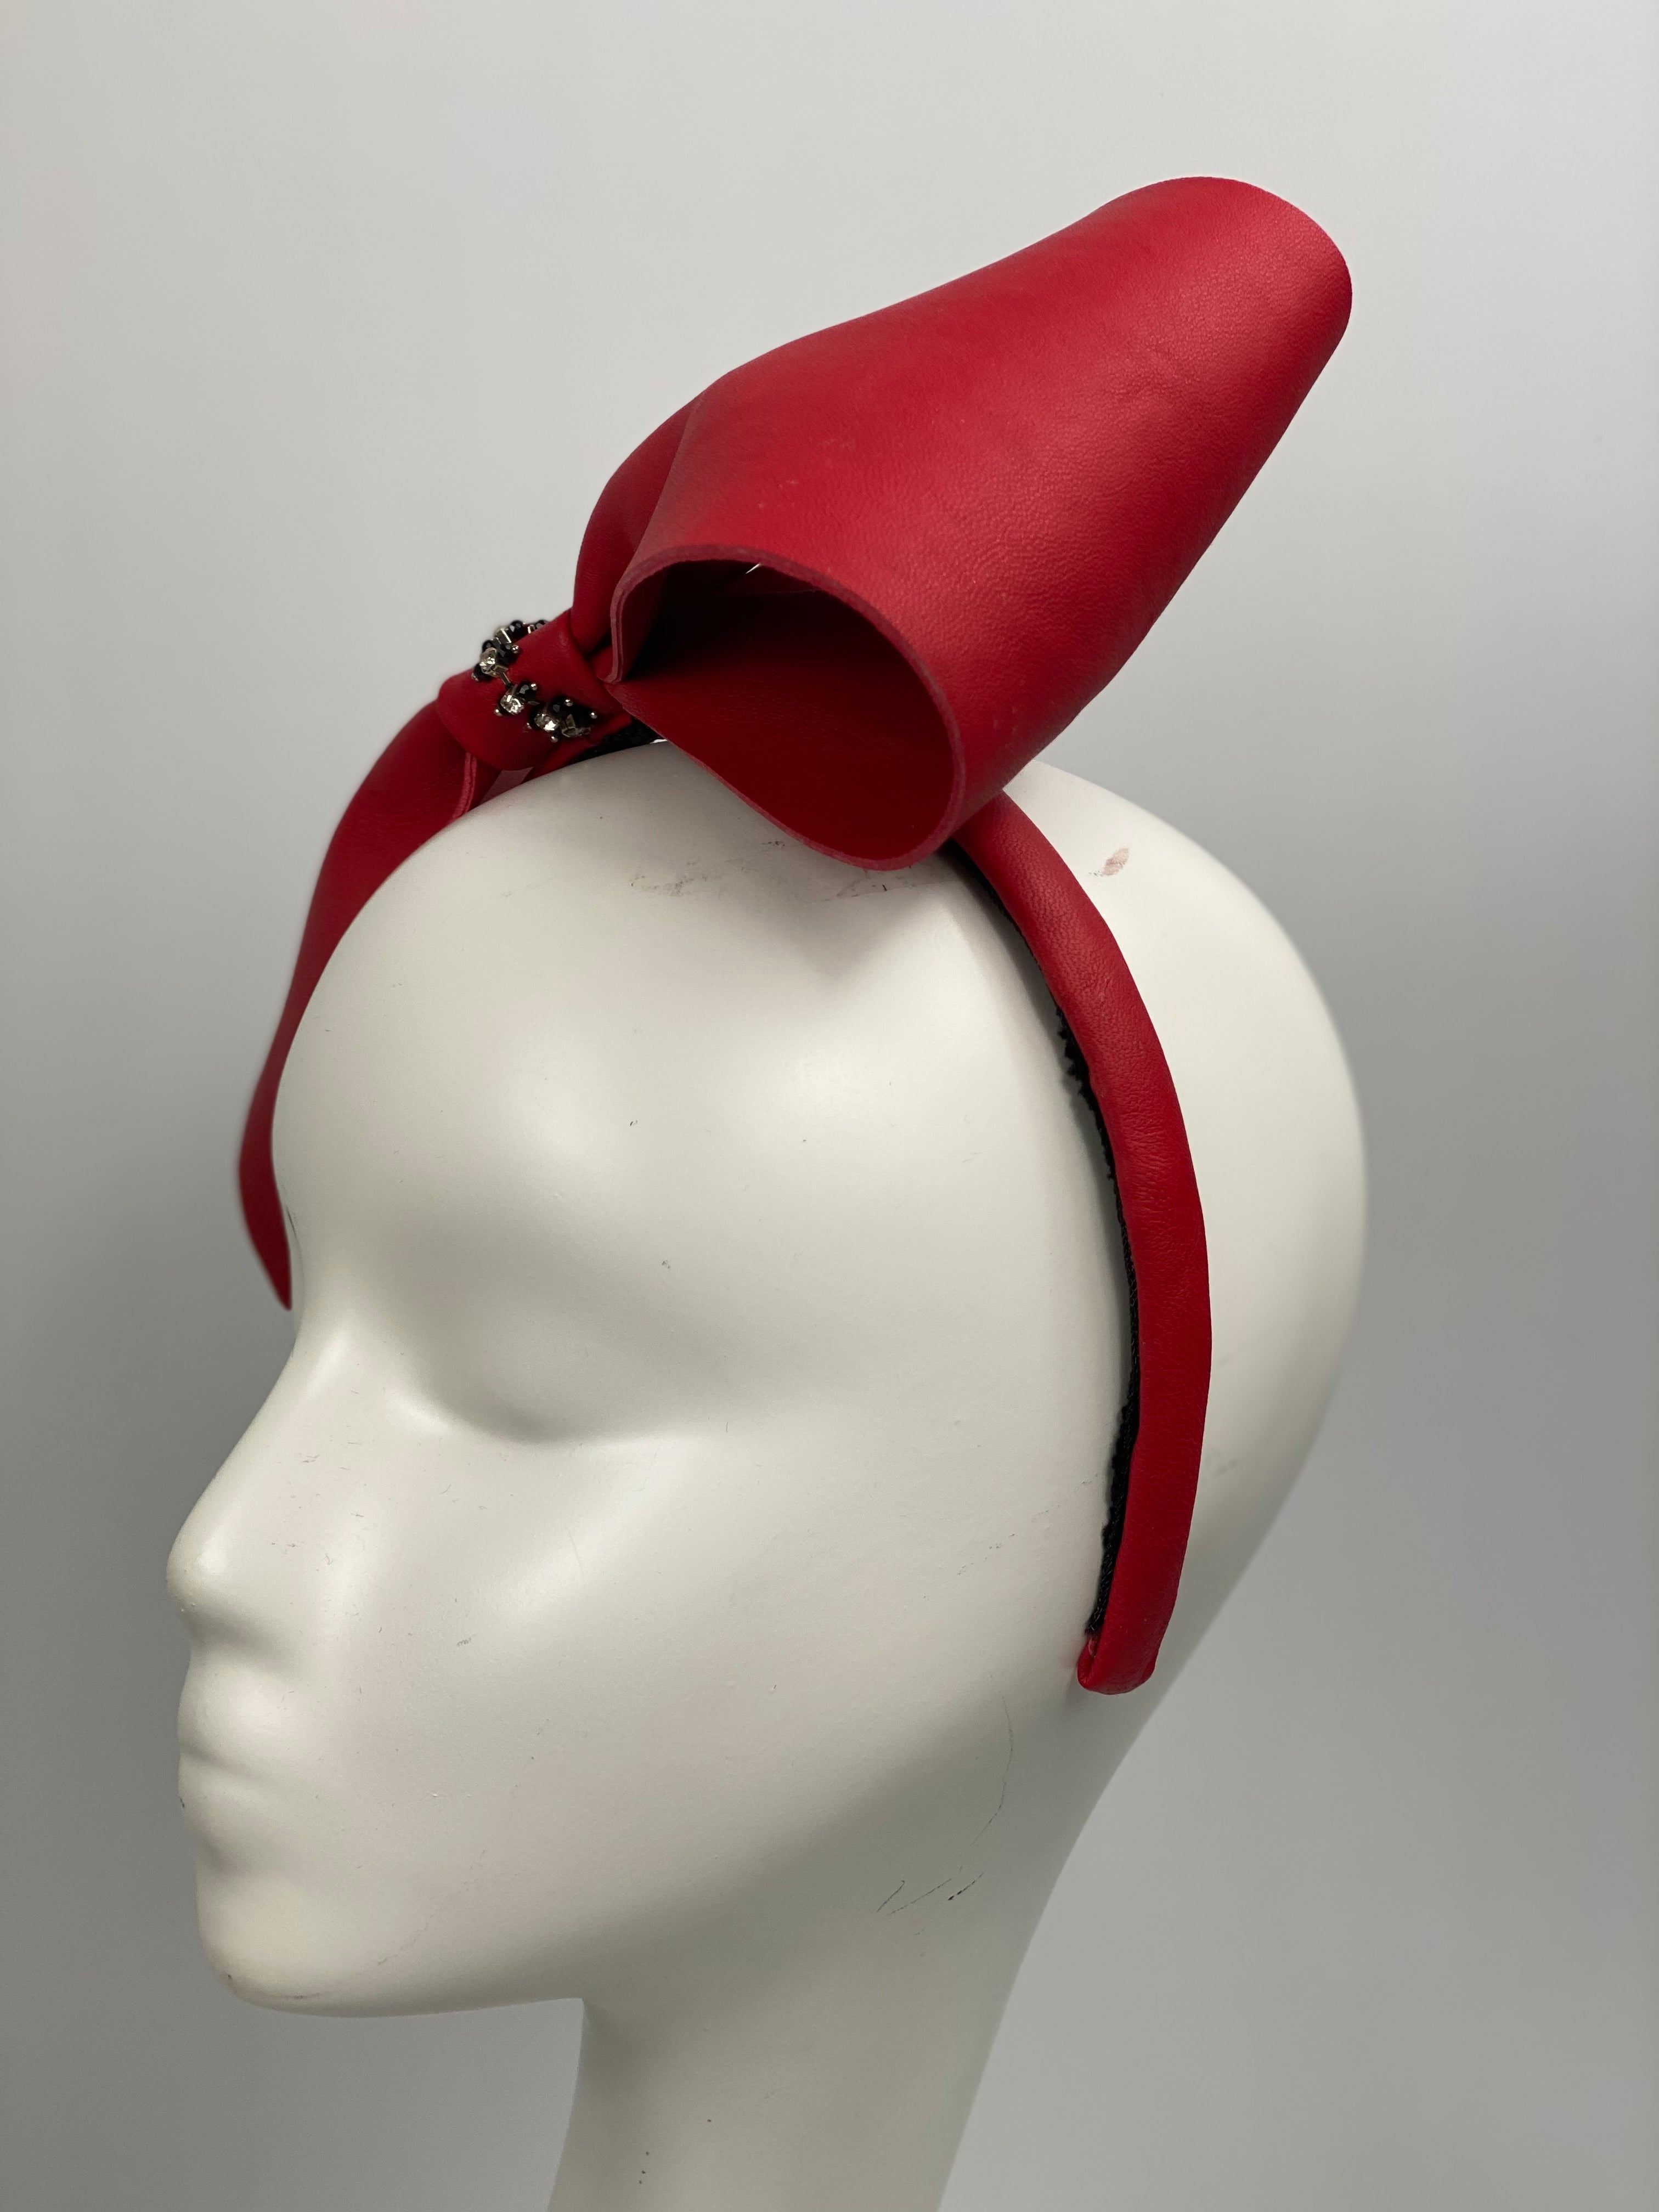 BELLA Large Red Leather Bow on Red Leather Headband Fascinator